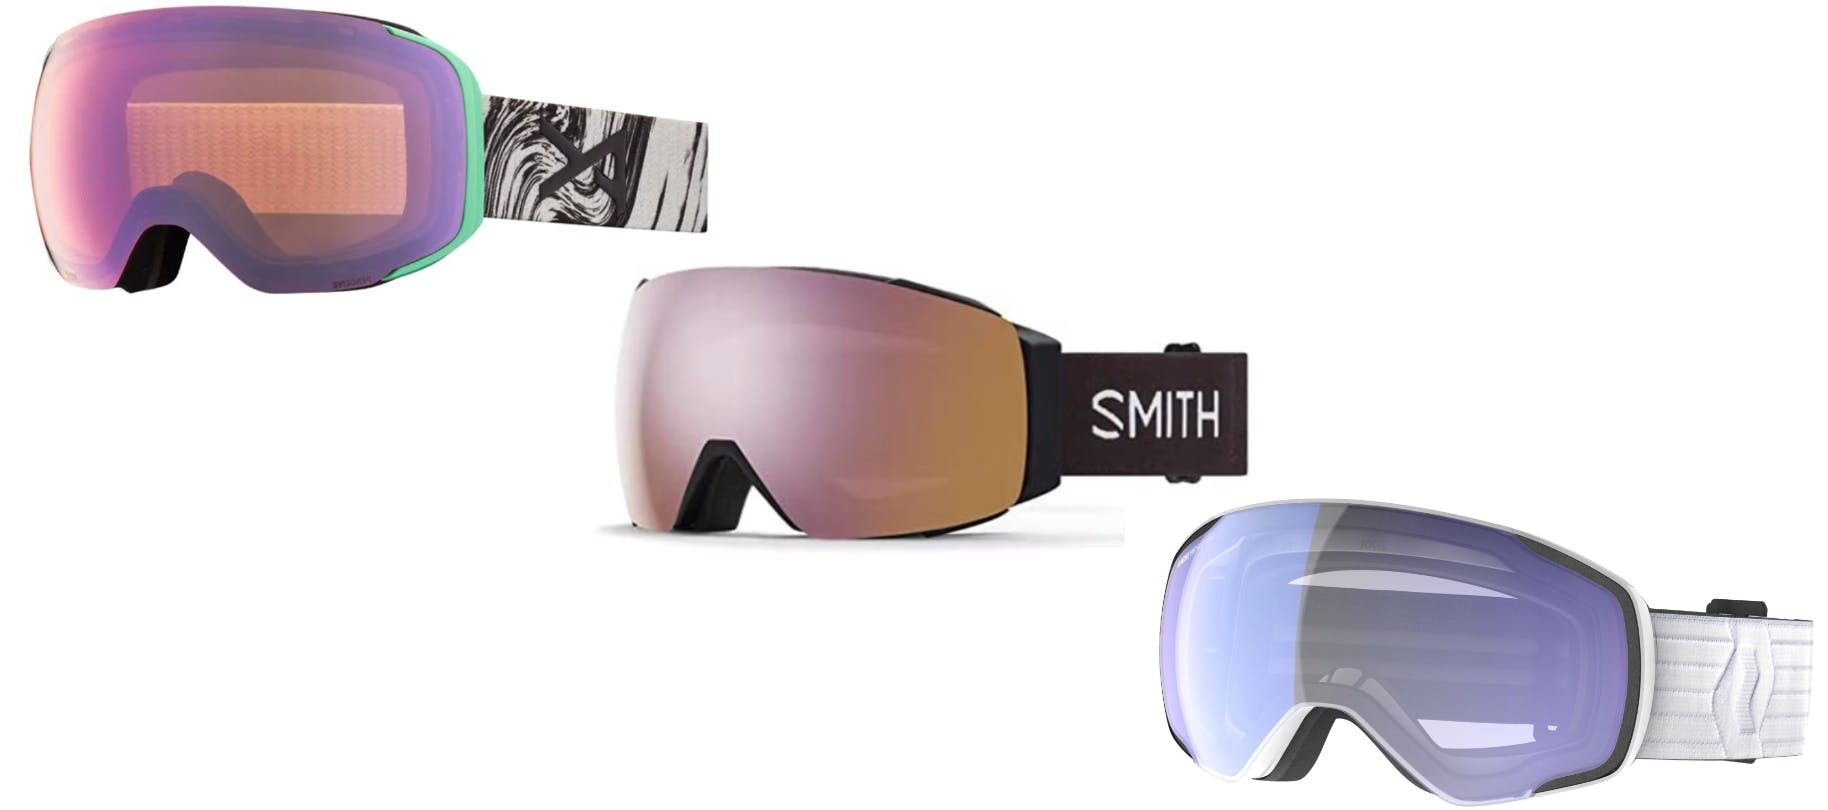 Three goggles. From left to right: the Anon M2 Goggles, the Smith I/O Mag Goggles, and the Scott Vapor Goggles.